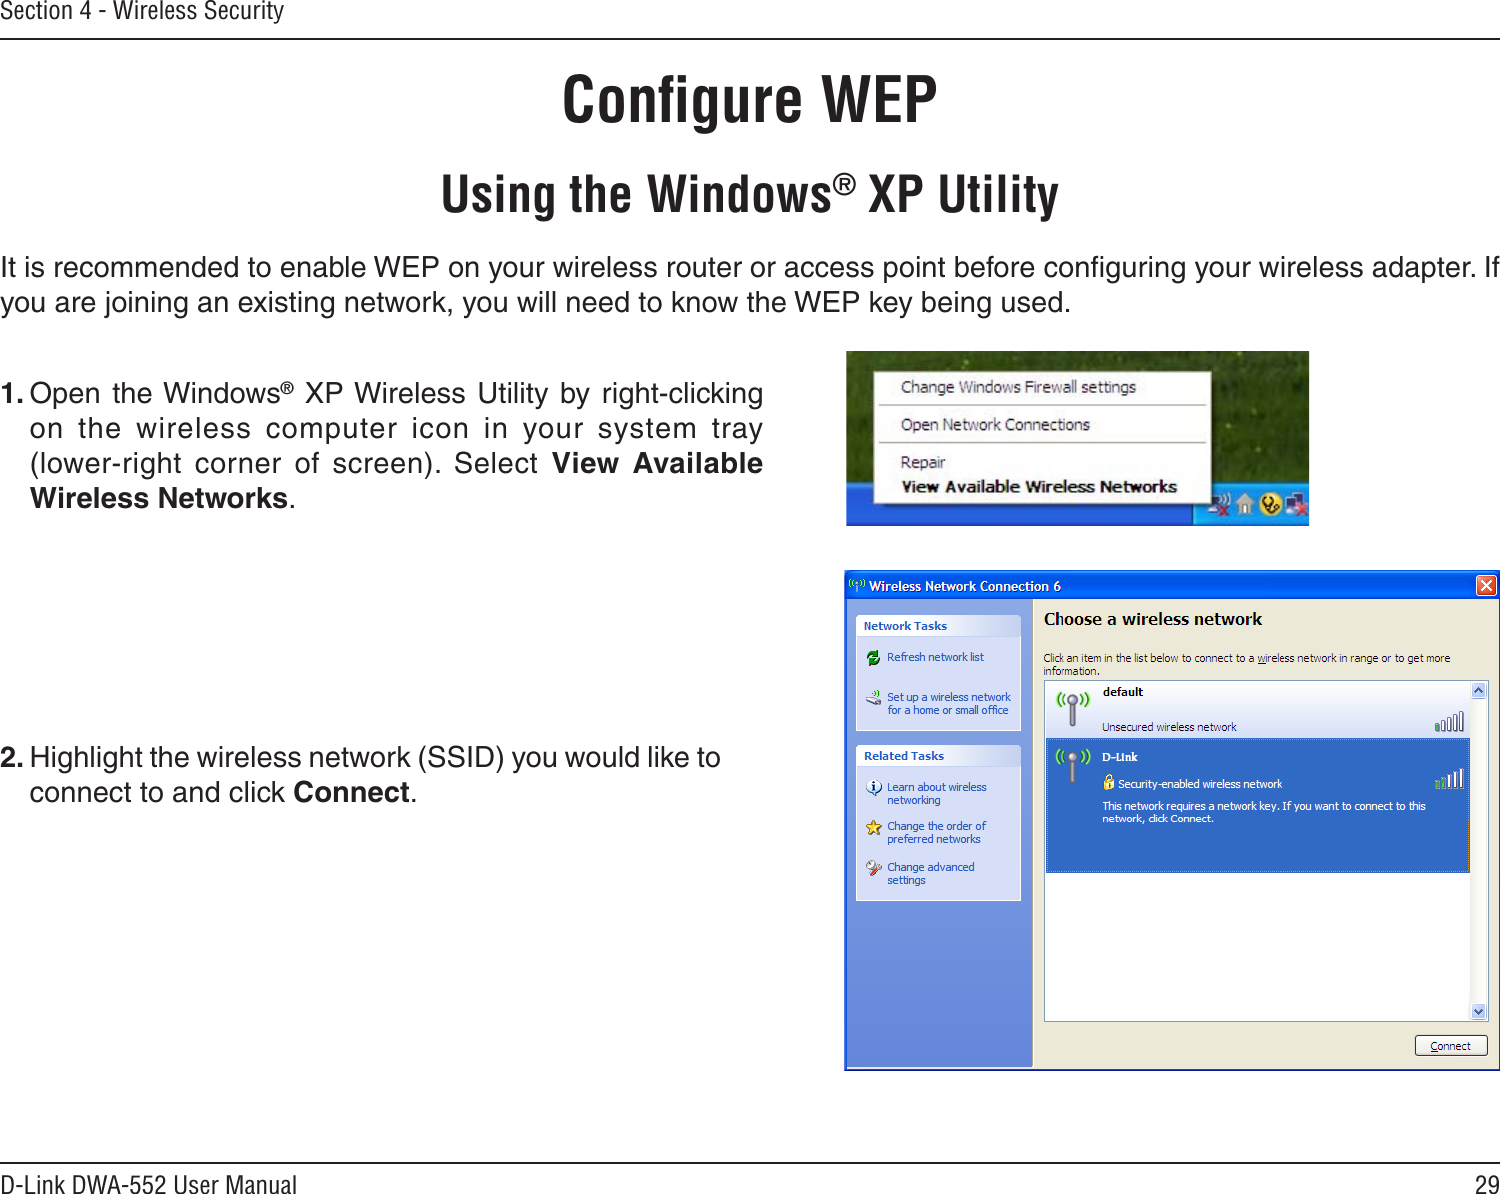 29D-Link DWA-552 User ManualSection 4 - Wireless SecurityConﬁgure WEPUsing the Windows® XP UtilityIt is recommended to enable WEP on your wireless router or access point before conﬁguring your wireless adapter. If you are joining an existing network, you will need to know the WEP key being used.2. Highlight the wireless network (SSID) you would like to connect to and click Connect.1. Open the Windows® XP Wireless  Utility  by right-clicking on  the  wireless  computer  icon  in  your  system  tray  (lower-right  corner  of  screen).  Select  View  Available Wireless Networks. 